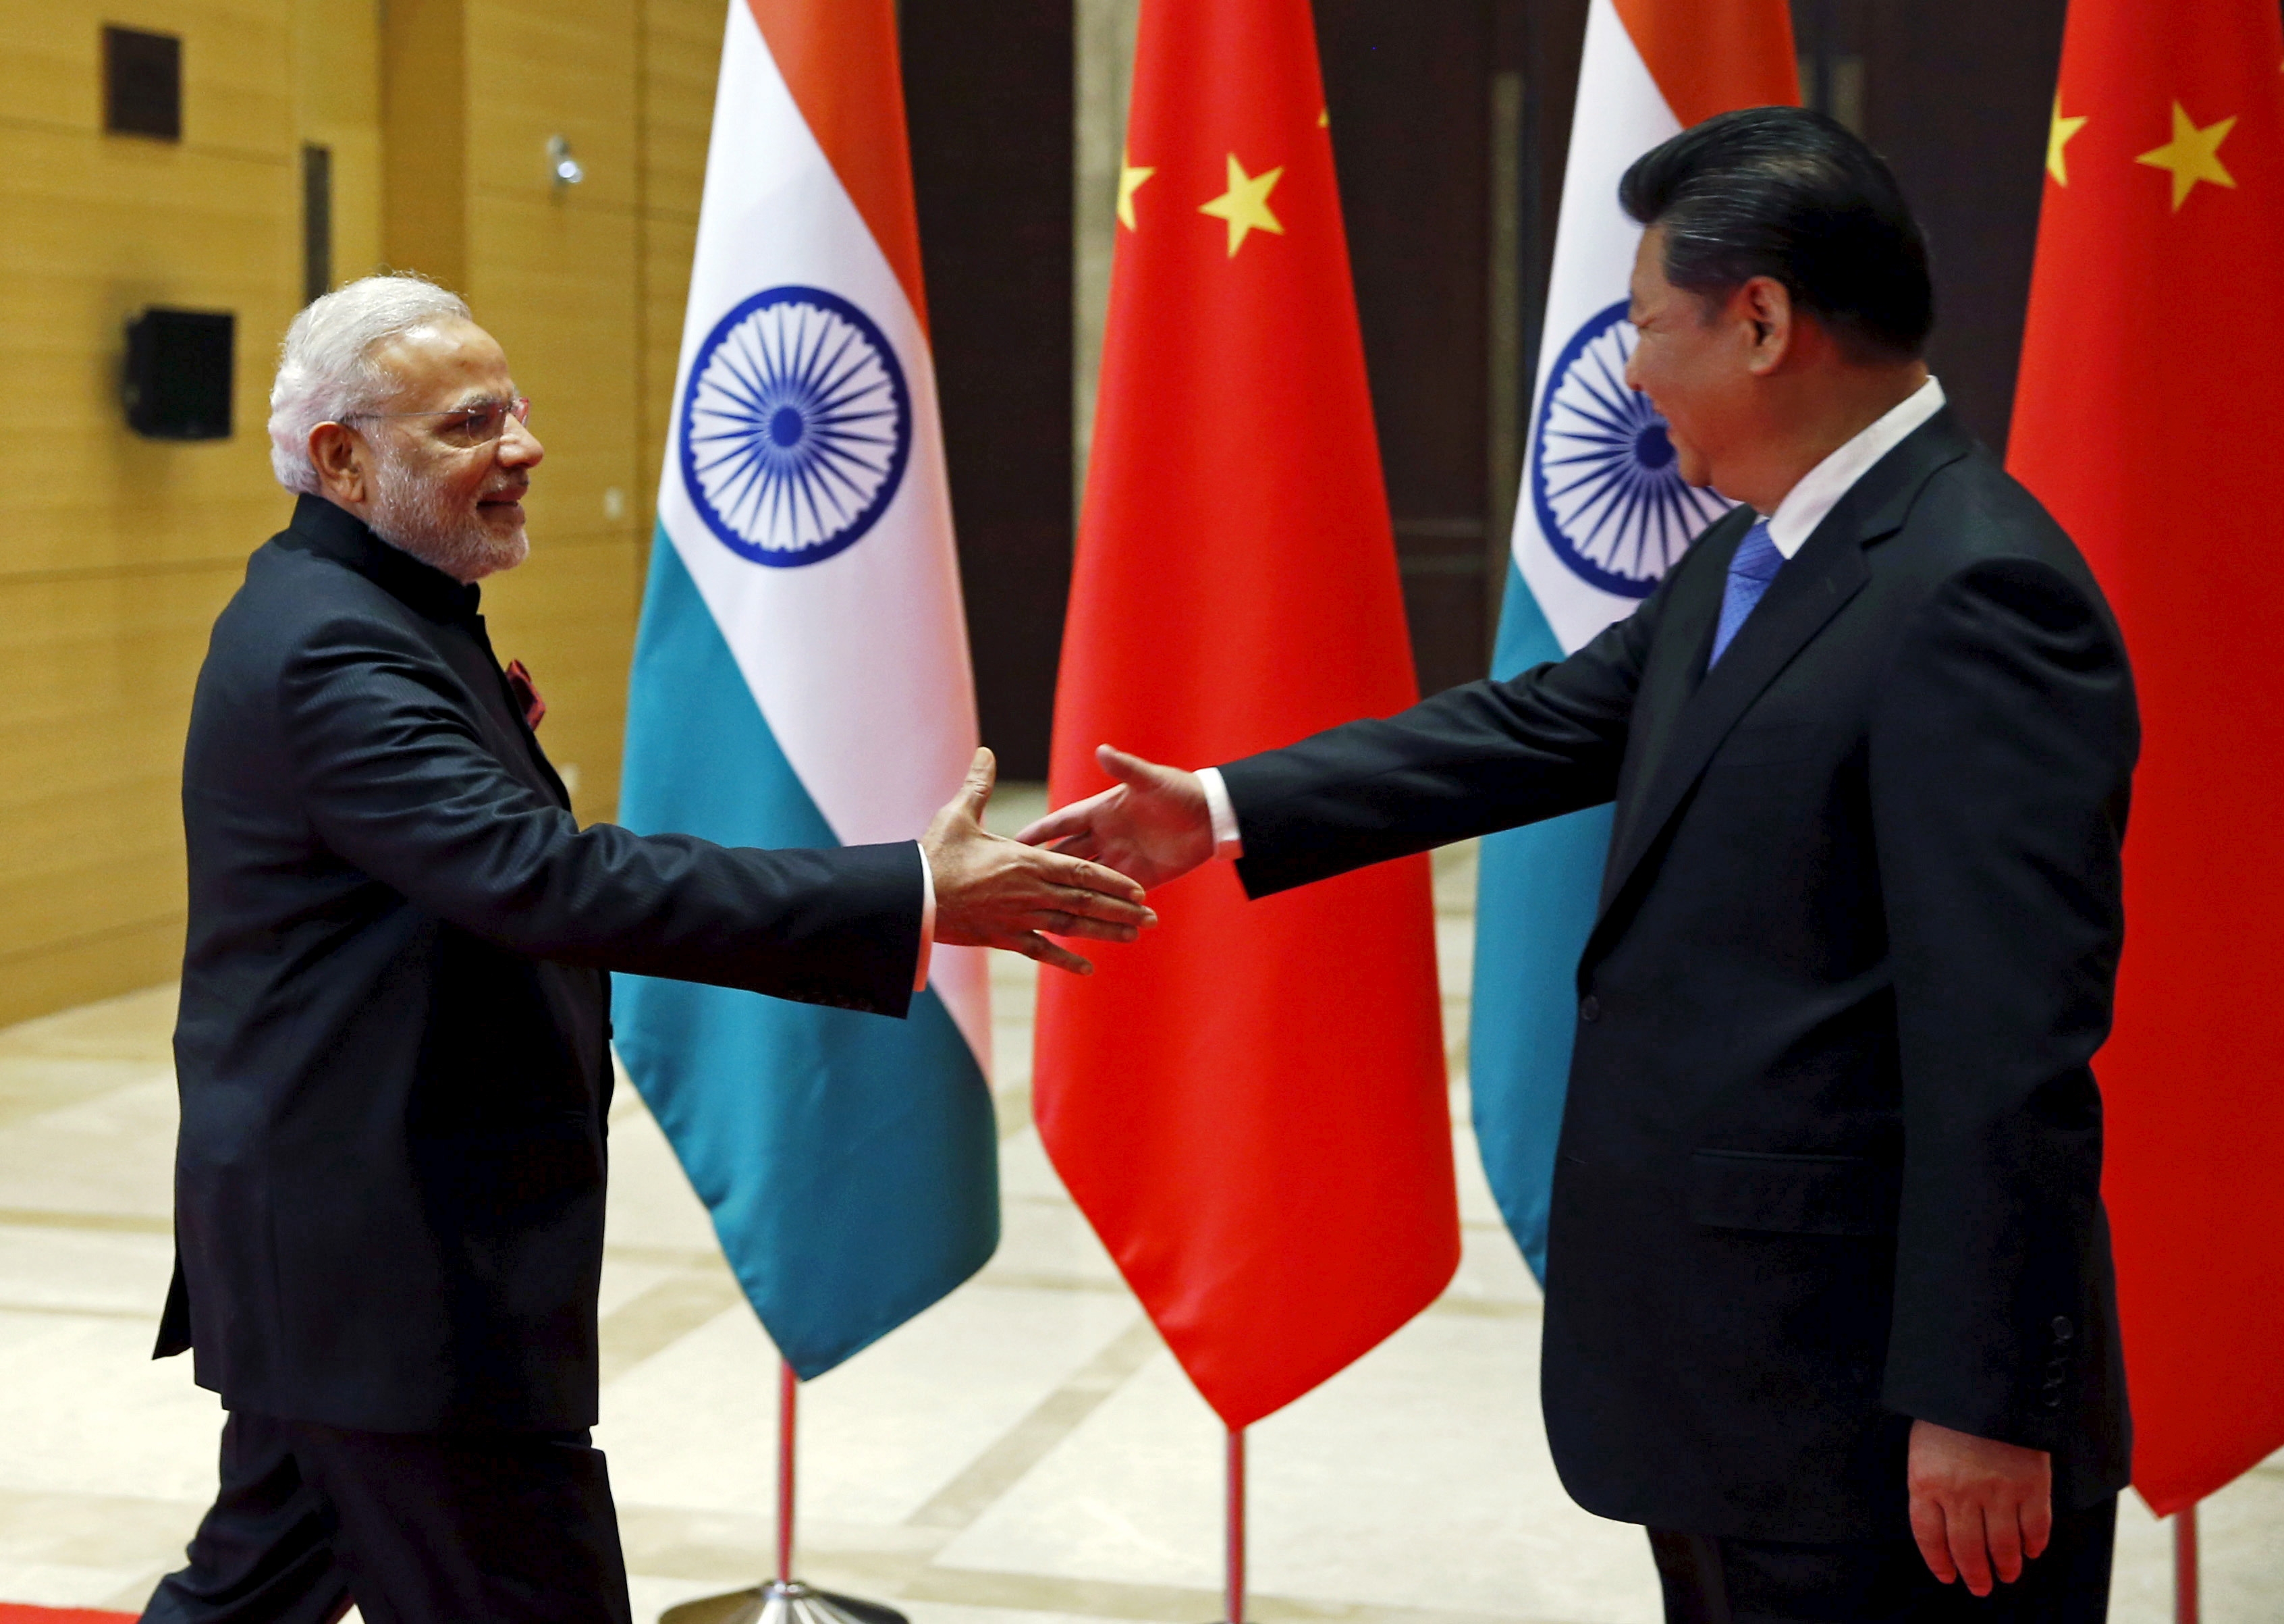 De-Coupling India’s Economy from China: Brouhaha or New Roadmap?